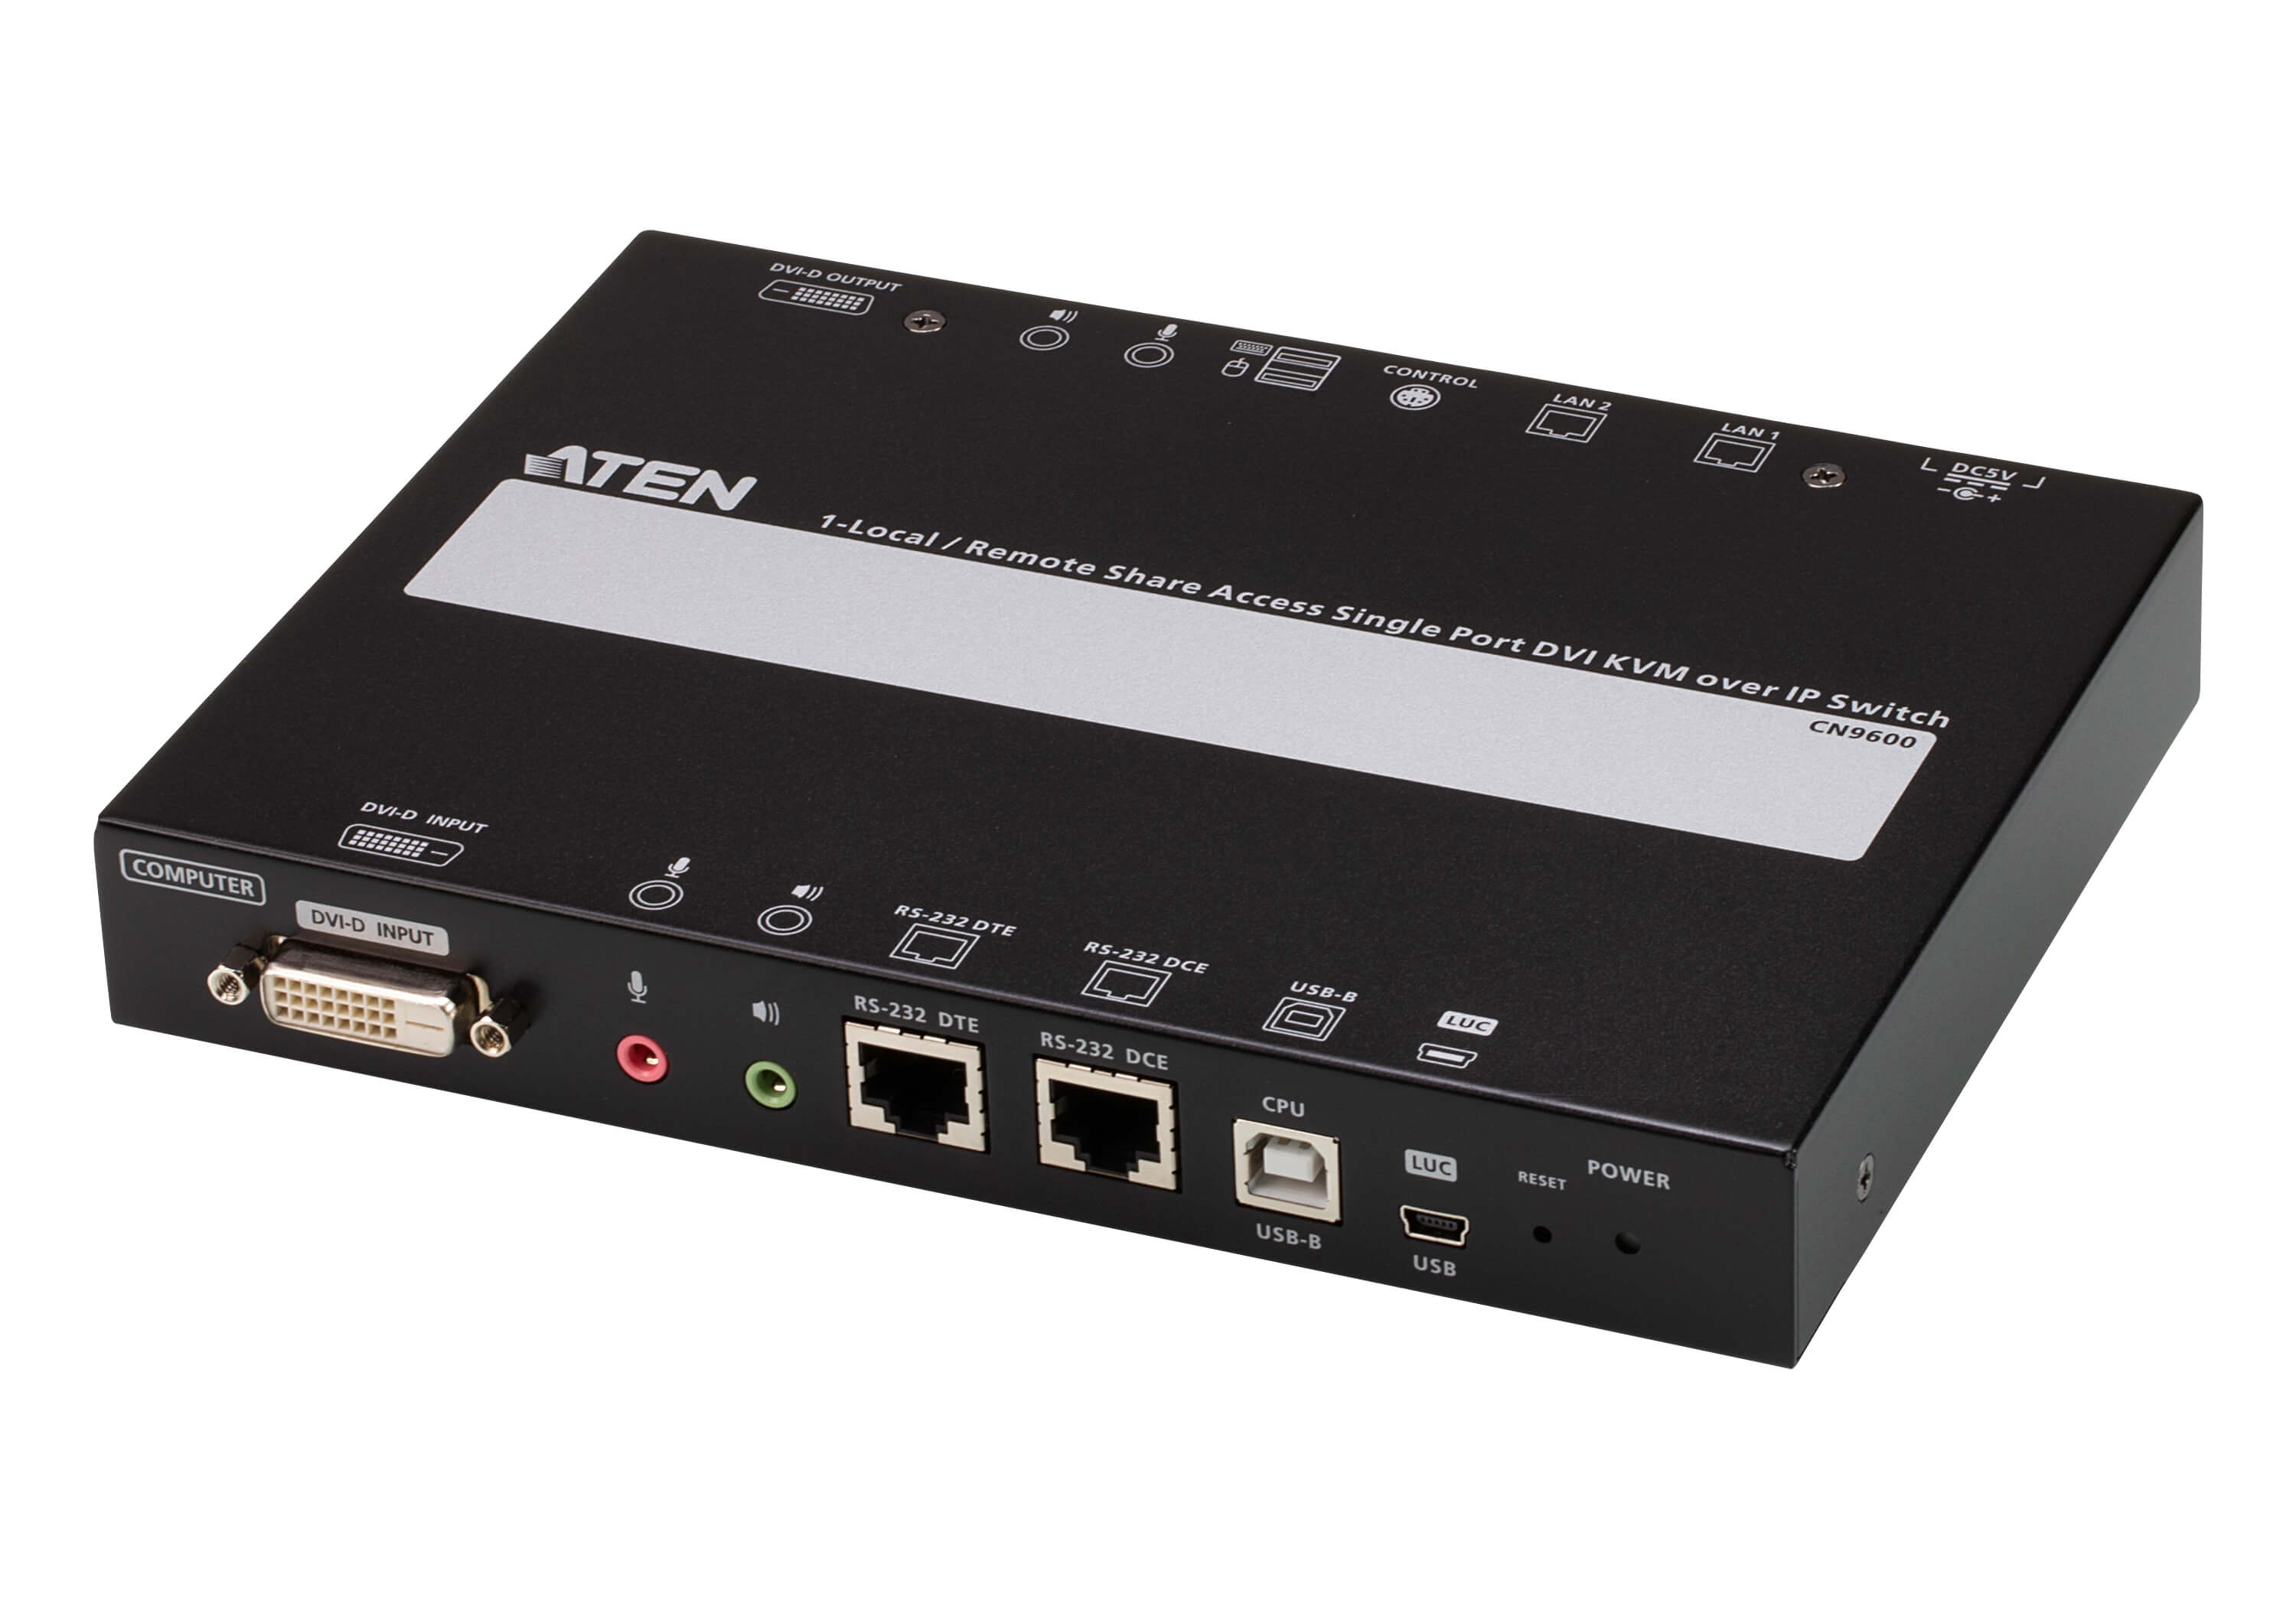 Aten Single Port DVI KVM Over IP with Audio and Virtual Media, supports up to 1920 x 1200 @ 60Hz, 1 DVI USB KVM Cable included, Dual RS232 serial port